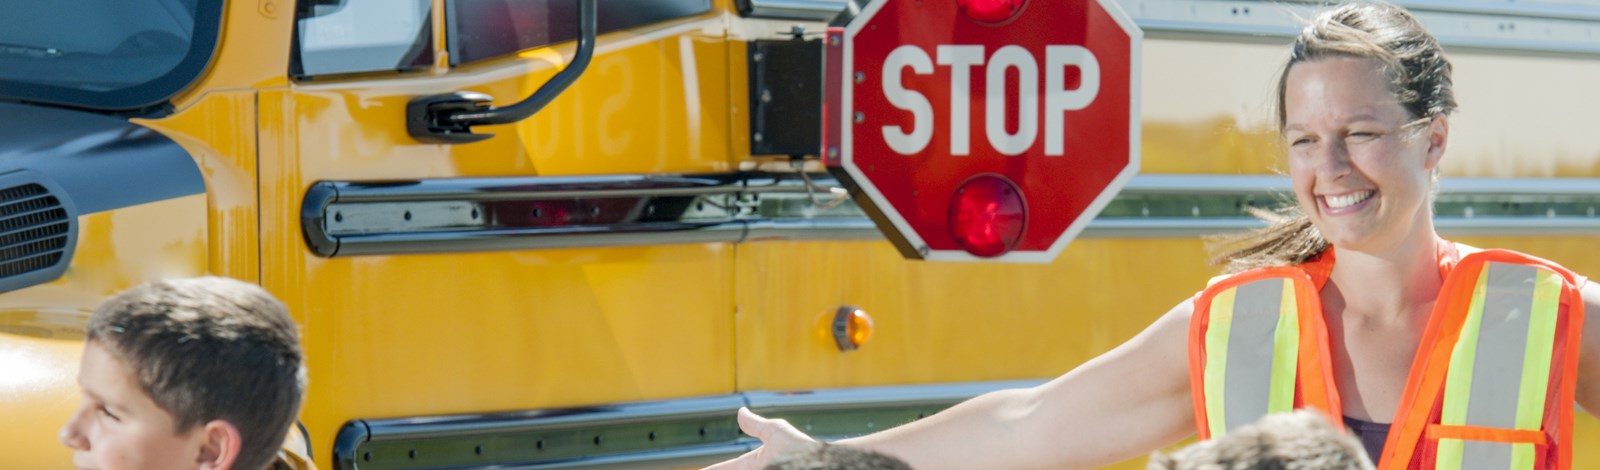 School bus with Stop sign arm out with the words Stop on the sign